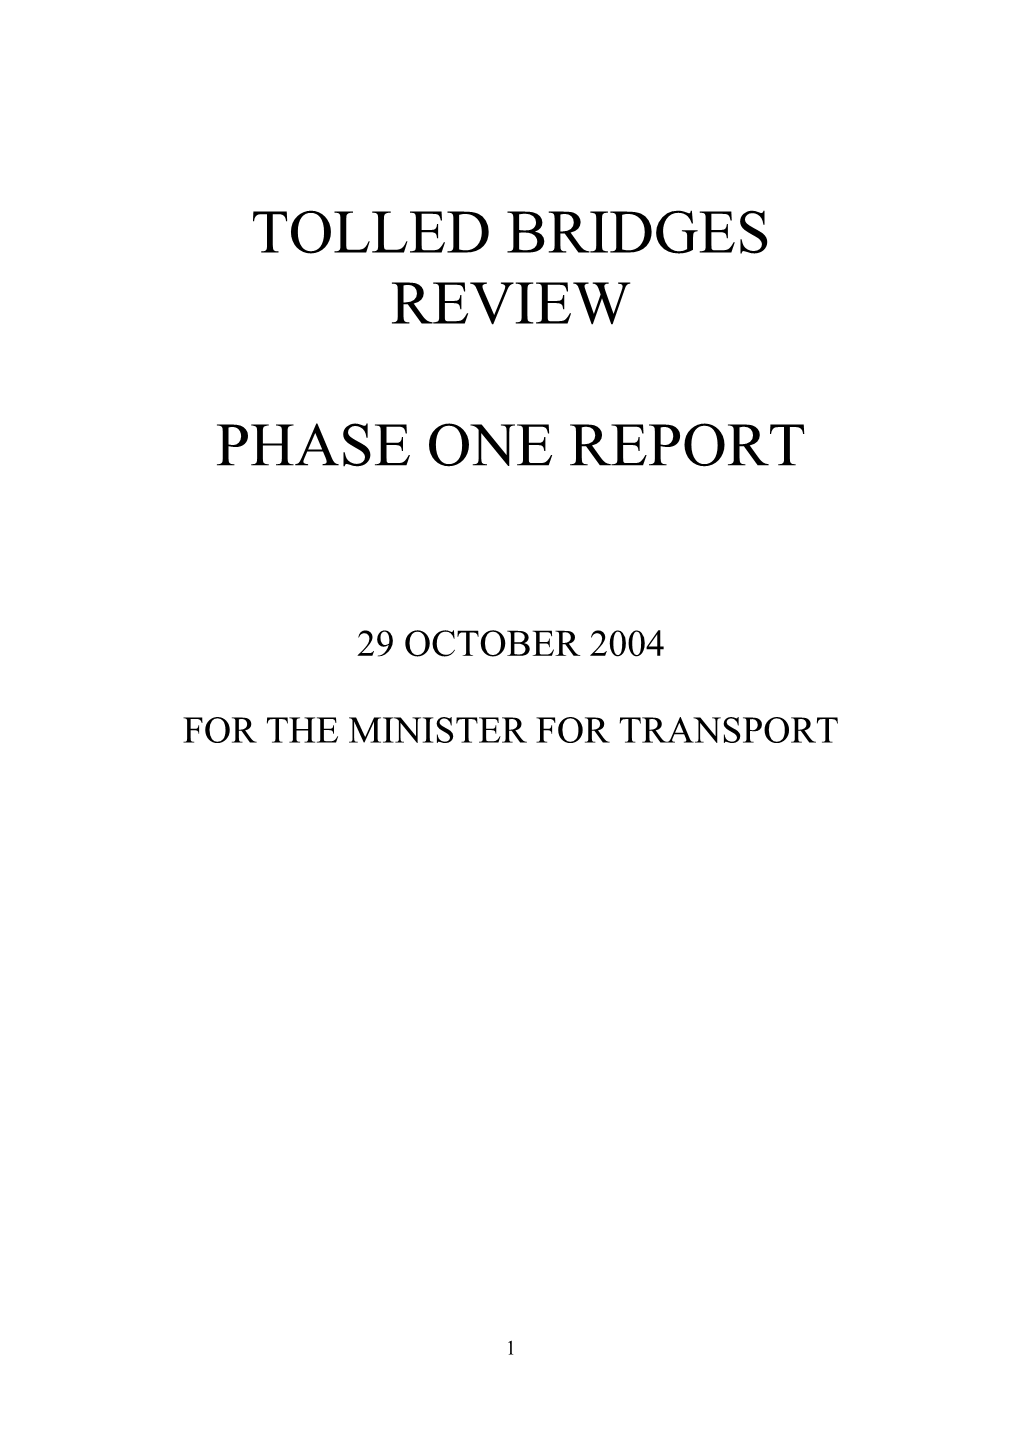 Tolled Bridges Review Phase One Report